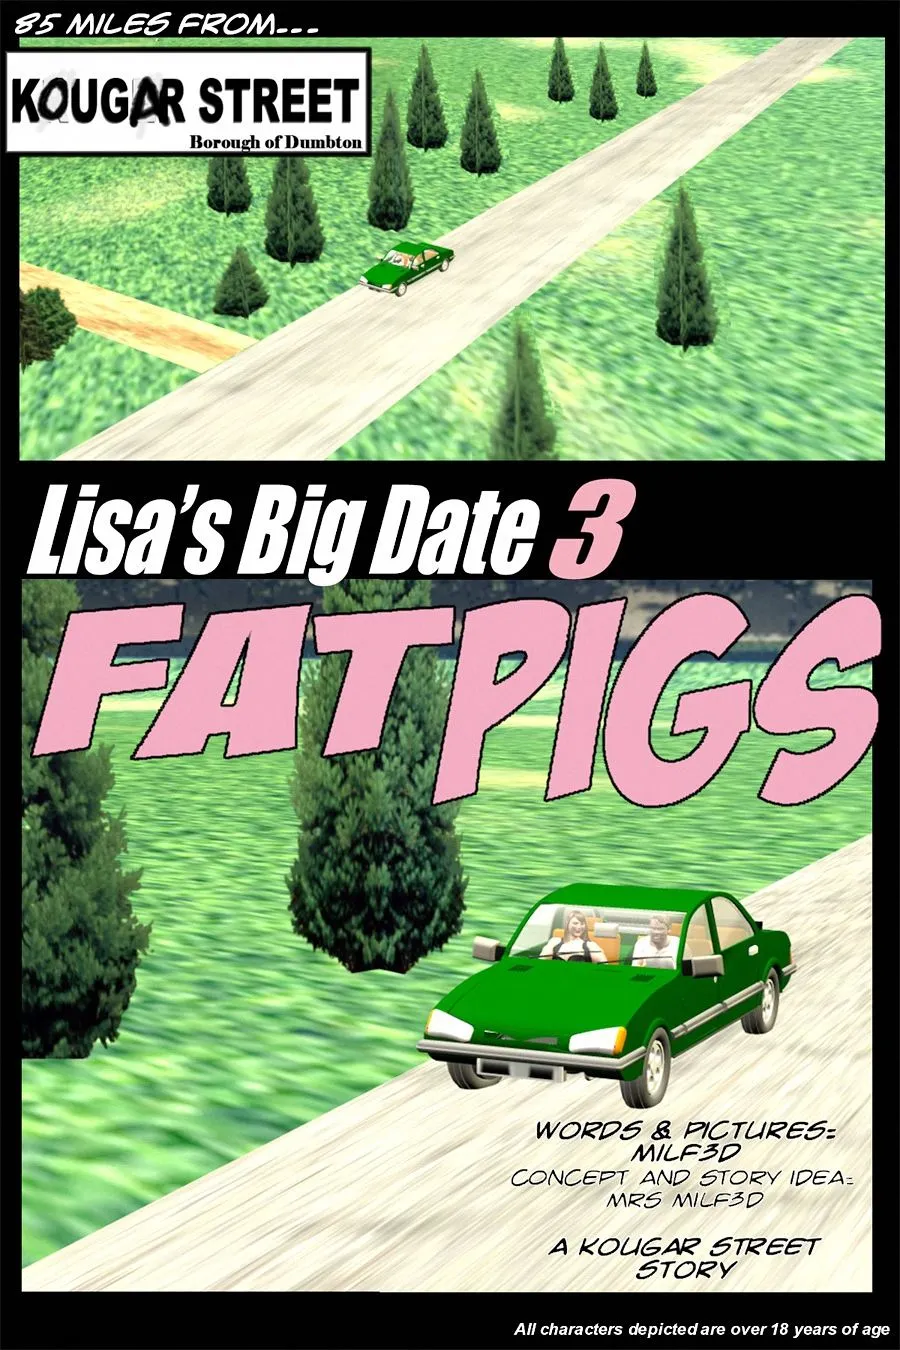 Milf-3D – Lisa’s Big Date 3 [Fat Pigs] - Page 3